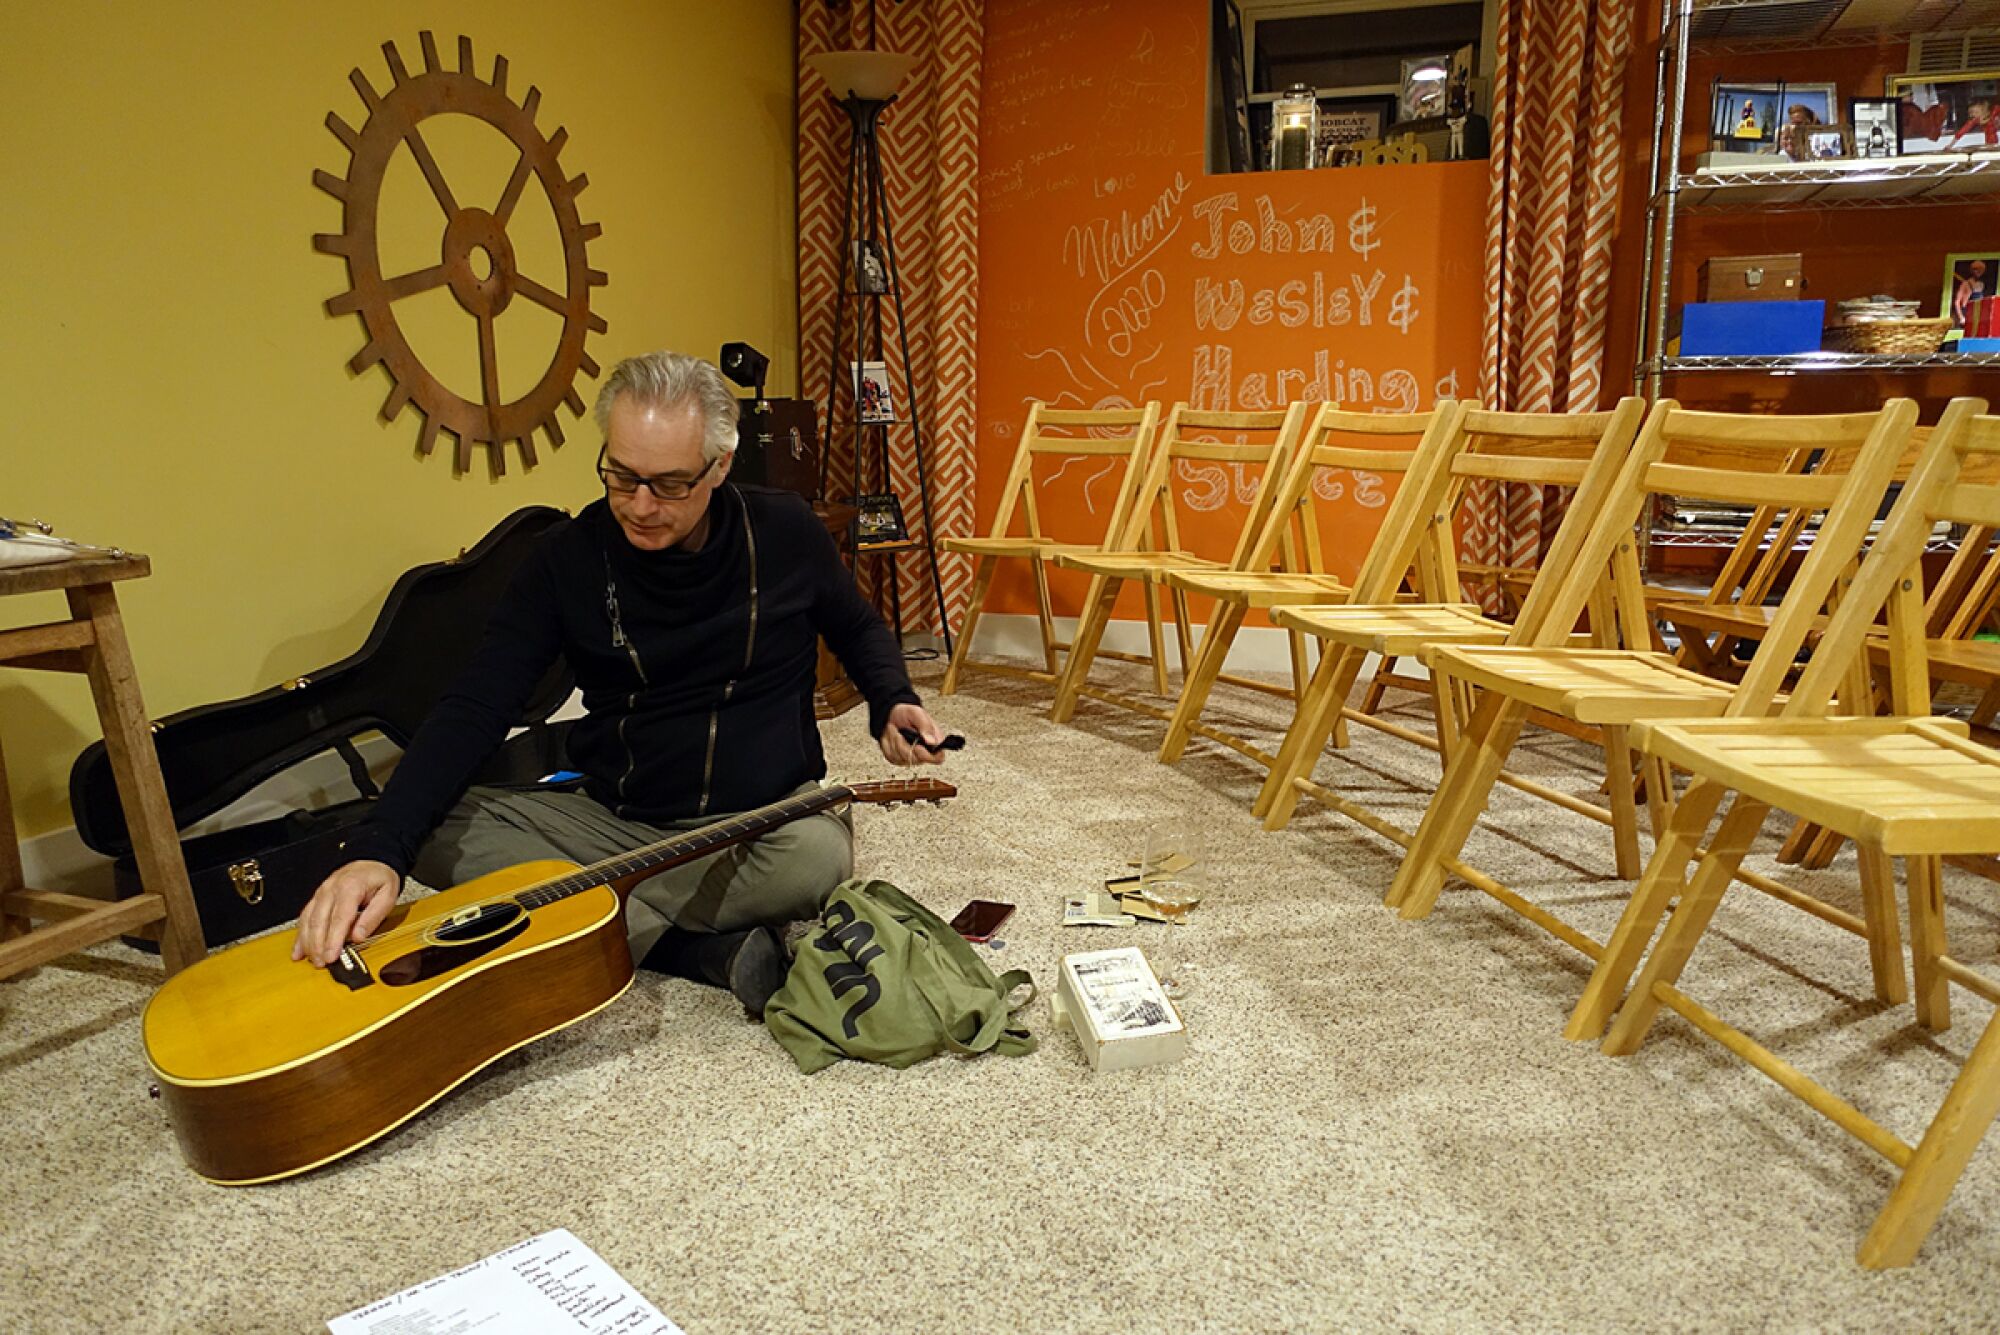 Wesley Stace restrings his guitar before a house concert in Columbus, Ohio